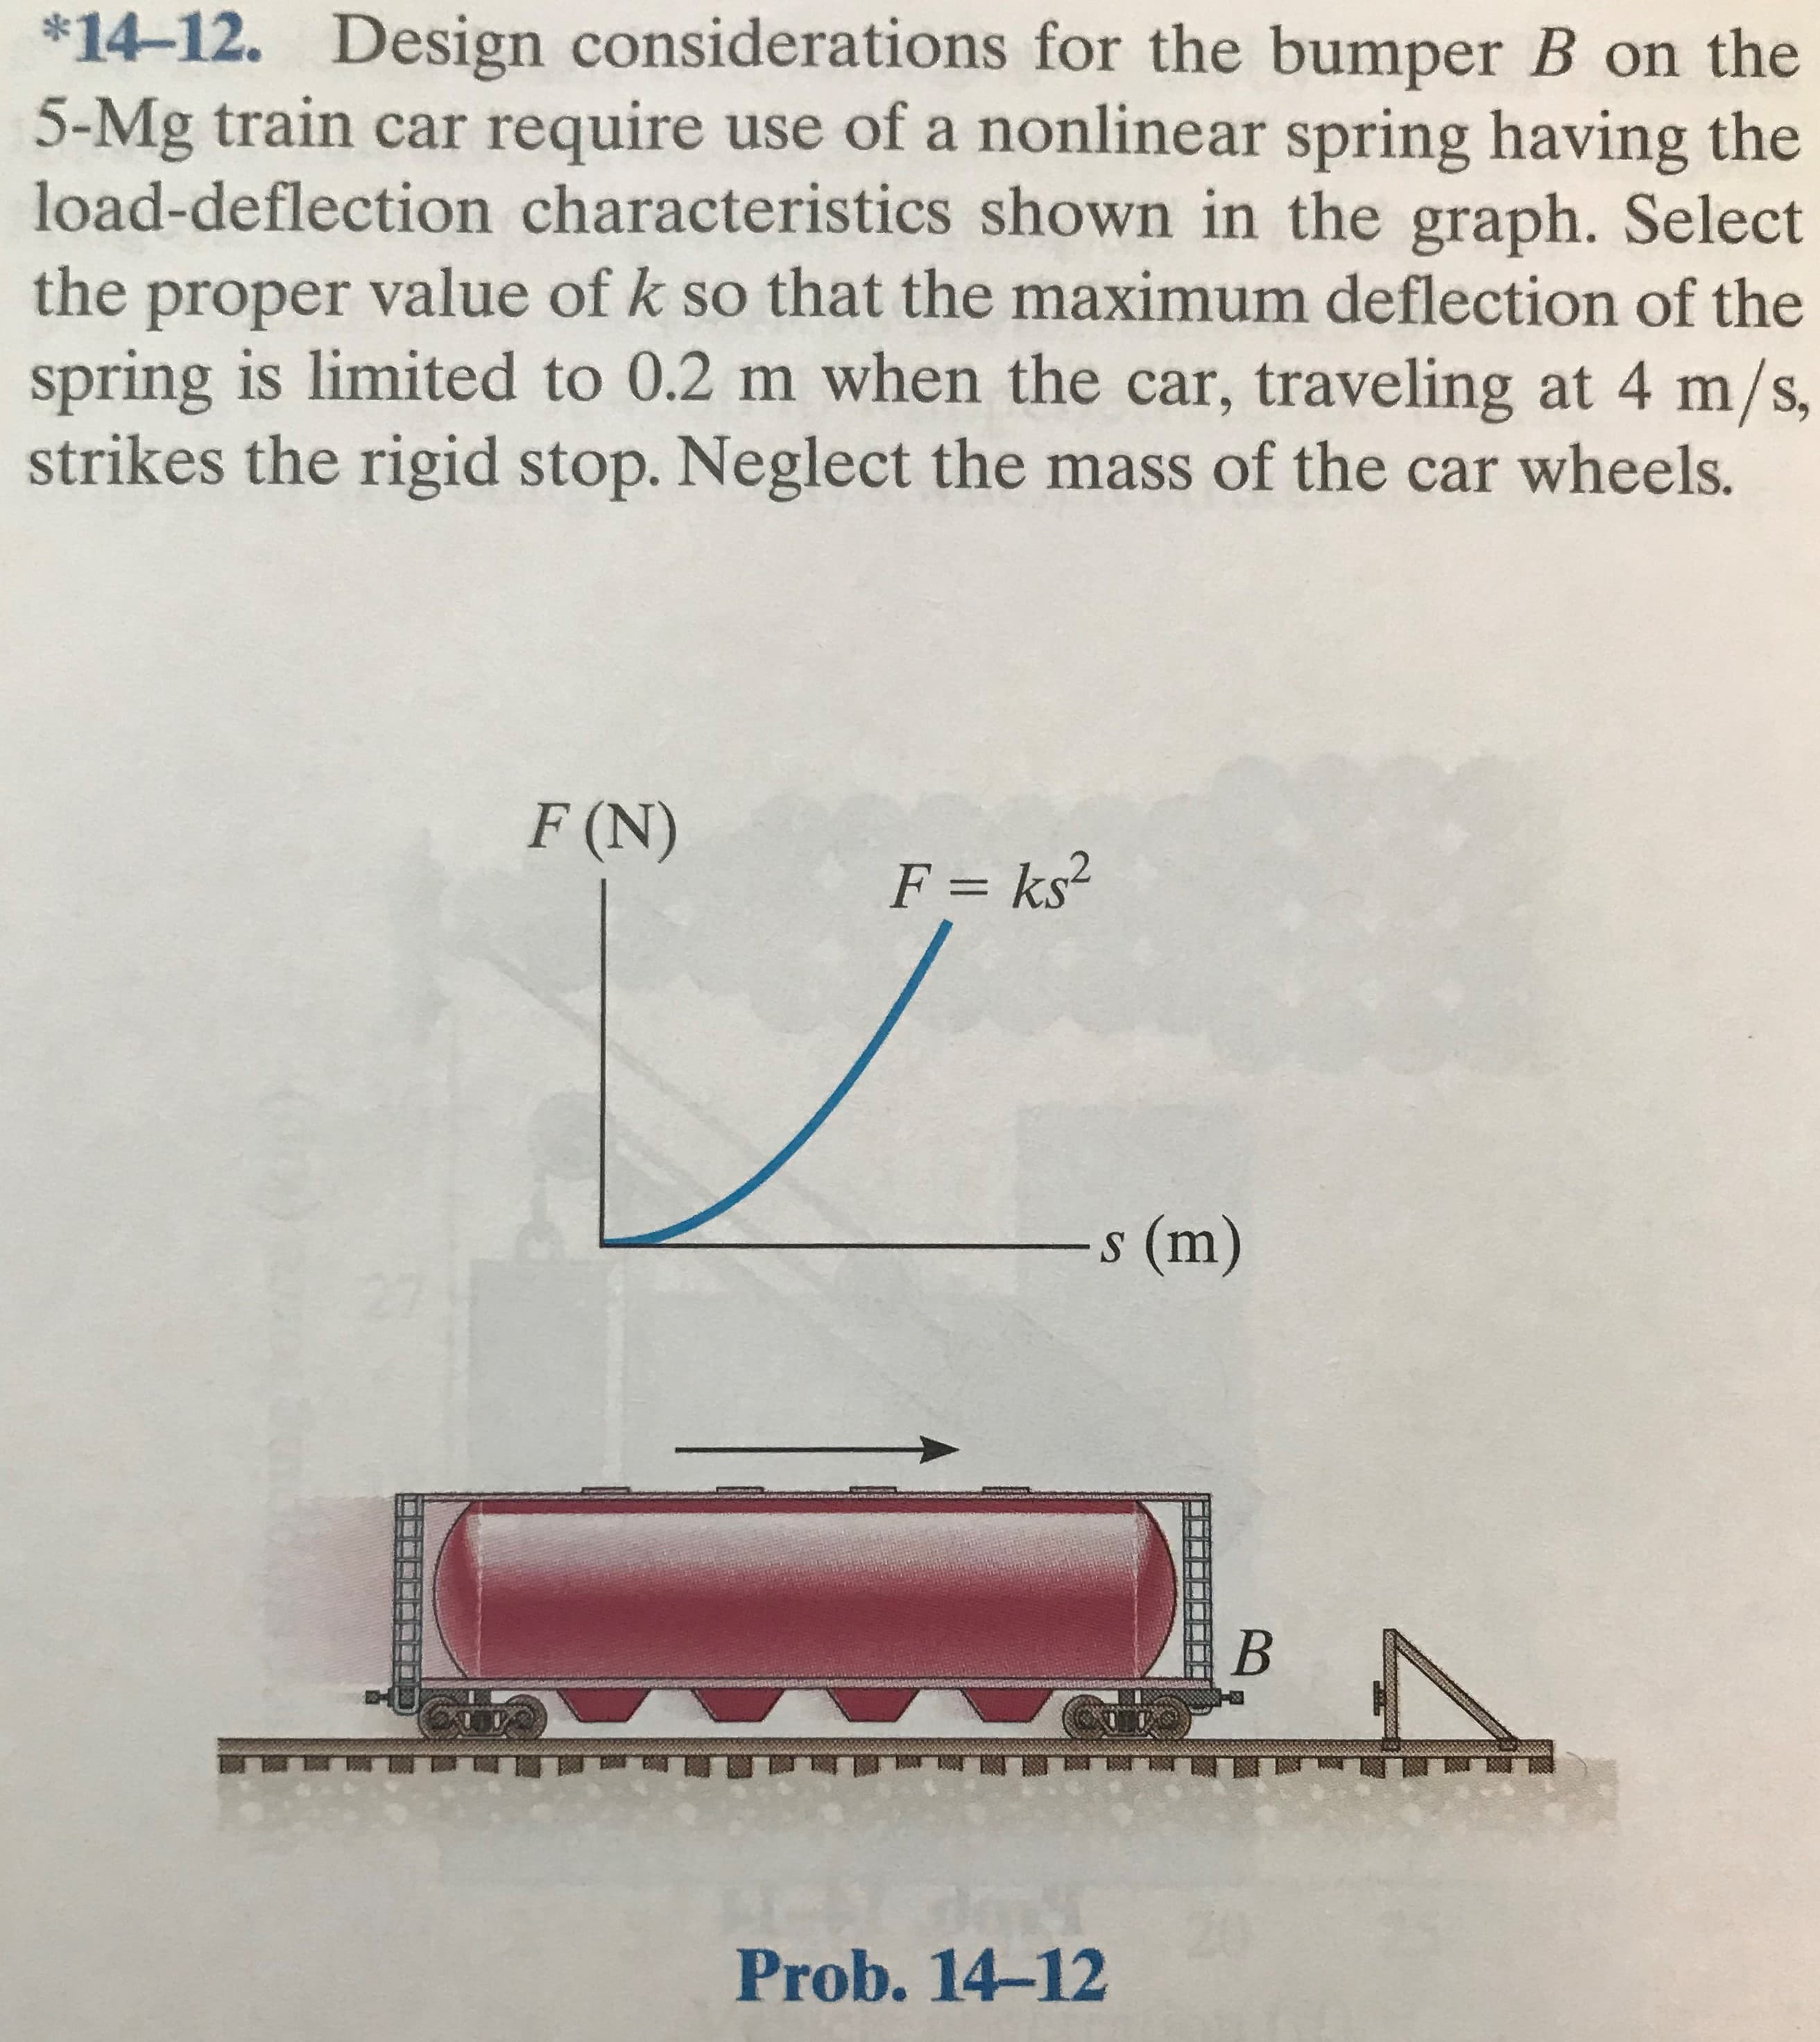 *14-12. Design considerations for the bumper B on the
5-Mg train car require use of a nonlinear spring having the
load-deflection characteristics shown in the graph. Select
the proper value of k so that the maximum deflection of the
spring is limited to 0.2 m when the car, traveling at 4 m/s,
strikes the rigid stop. Neglect the mass of the car wheels.
F (N)
F = ks²
s (m)
20
Prob. 14-12
